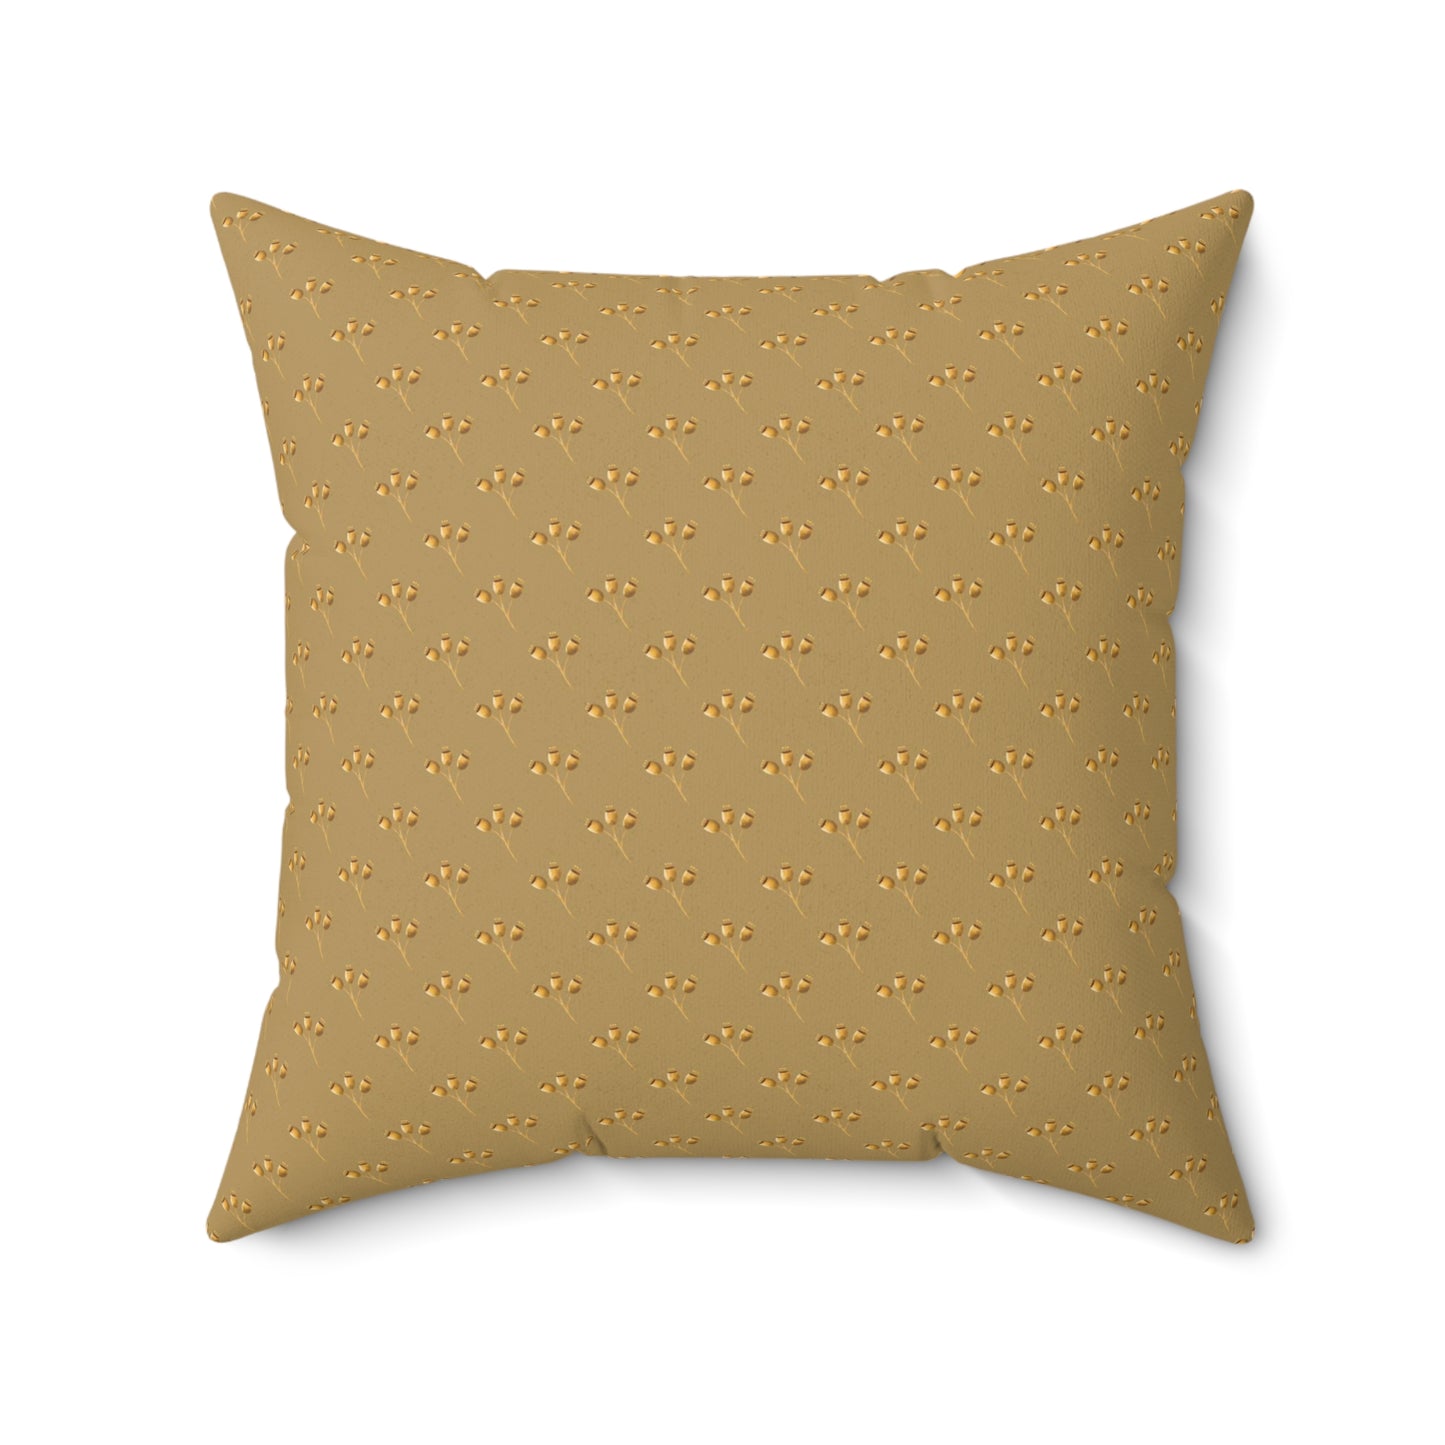 Golden Seed Pods Spun Polyester Square Pillow